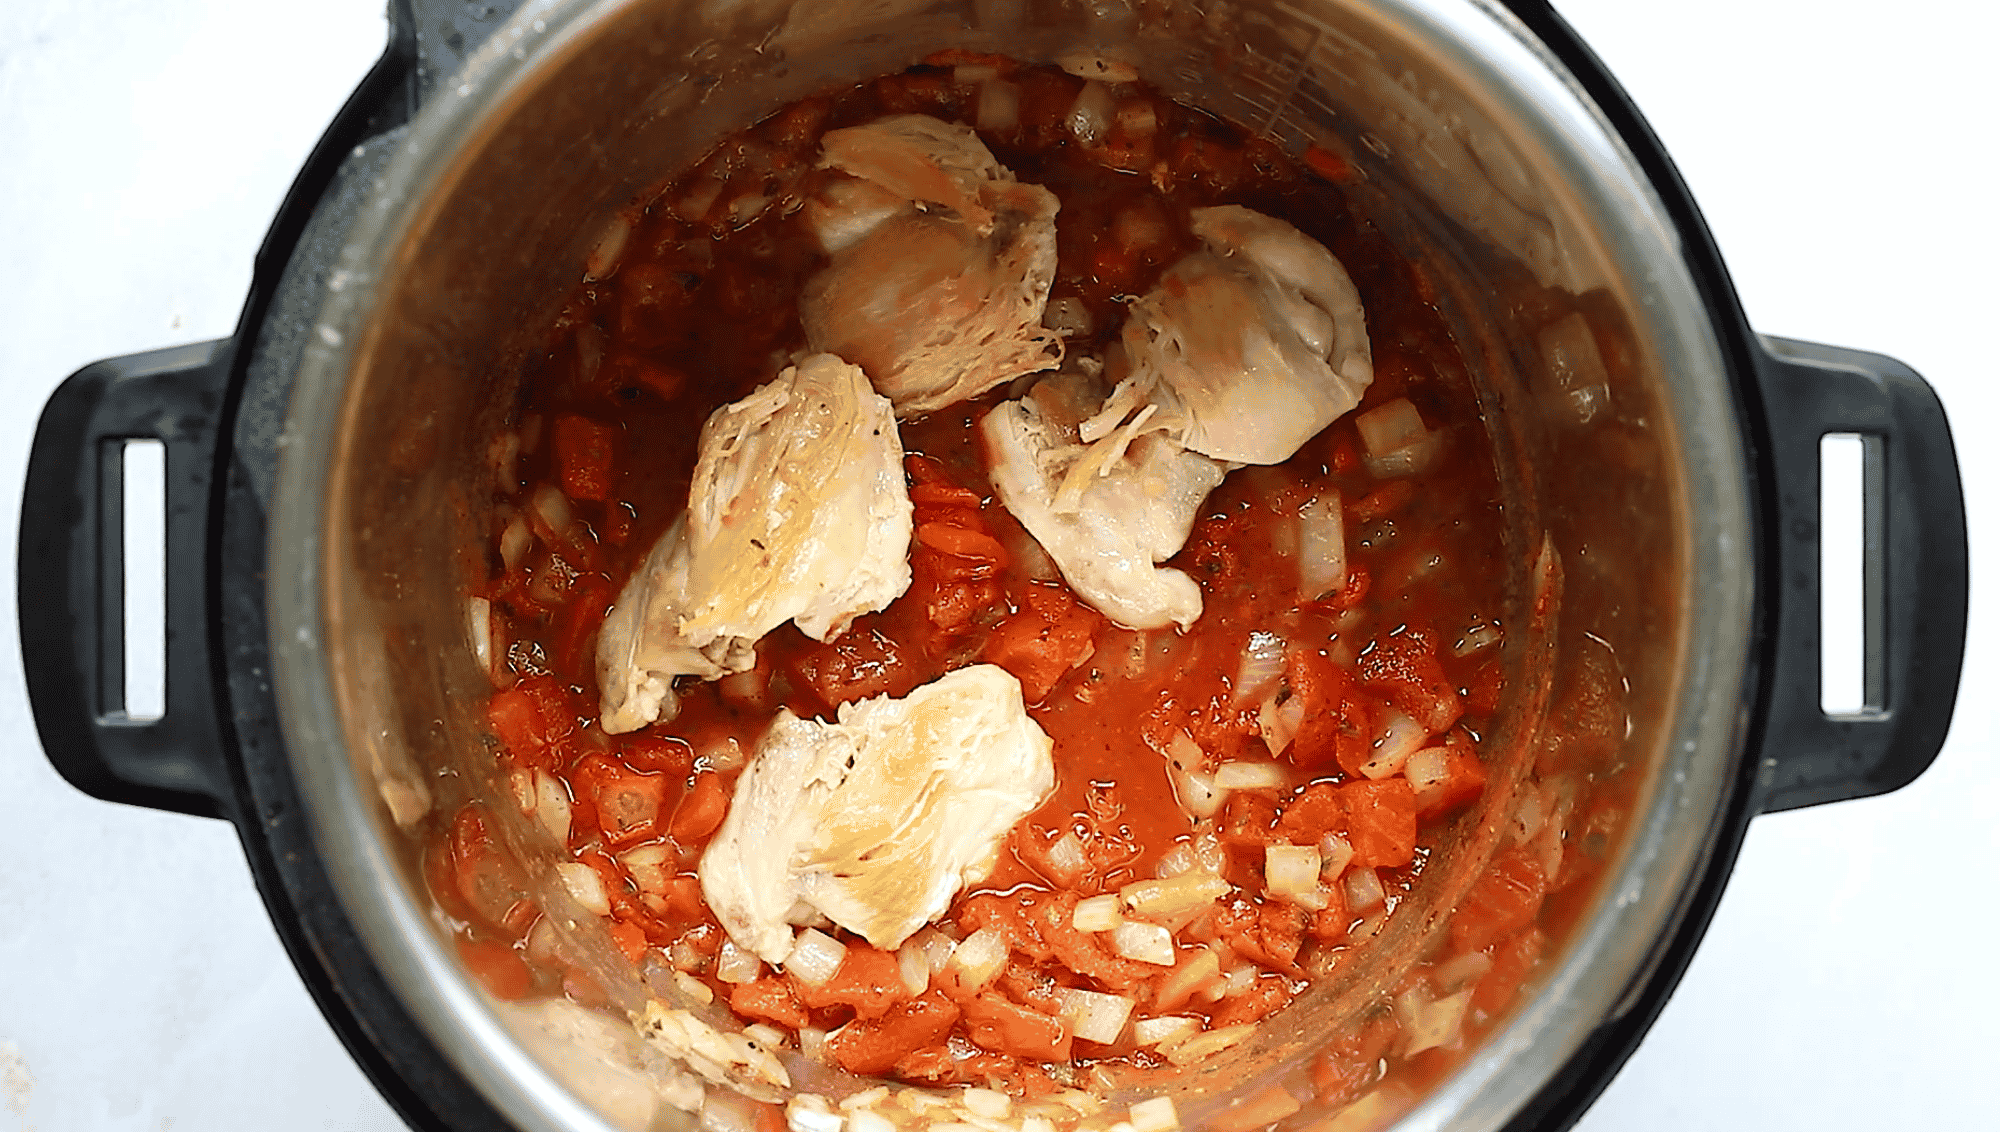 Overhead view of Instant Pot bowl containing chicken thighs and tomato sauce.
